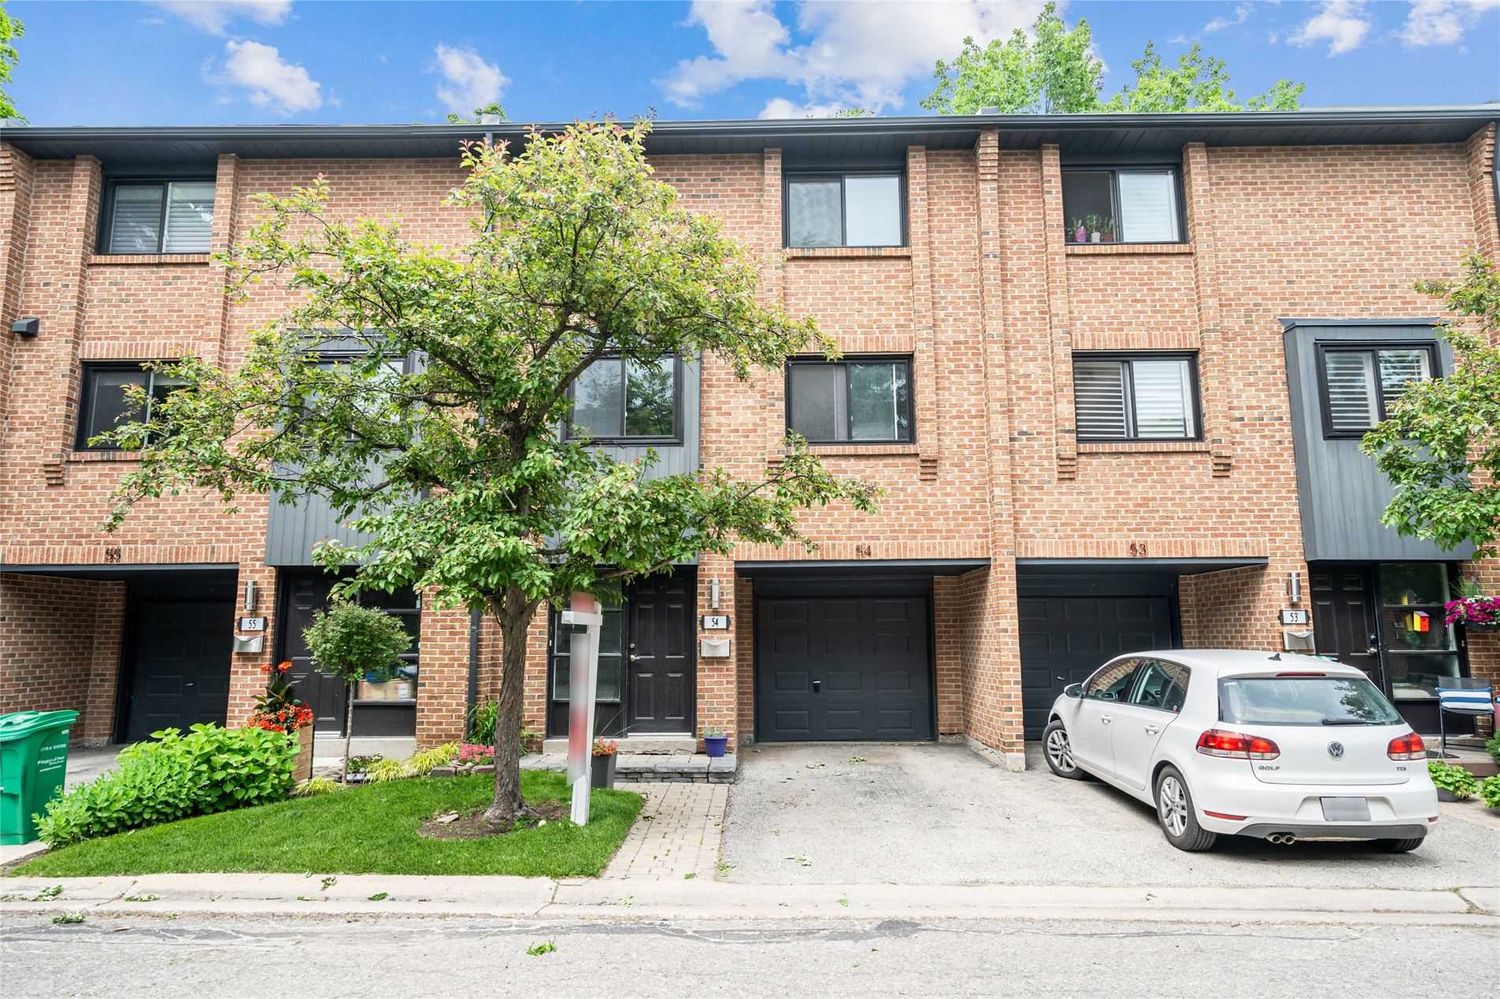 20 Mineola Road E. 20 Mineola Road East Townhomes is located in  Mississauga, Toronto - image #3 of 3